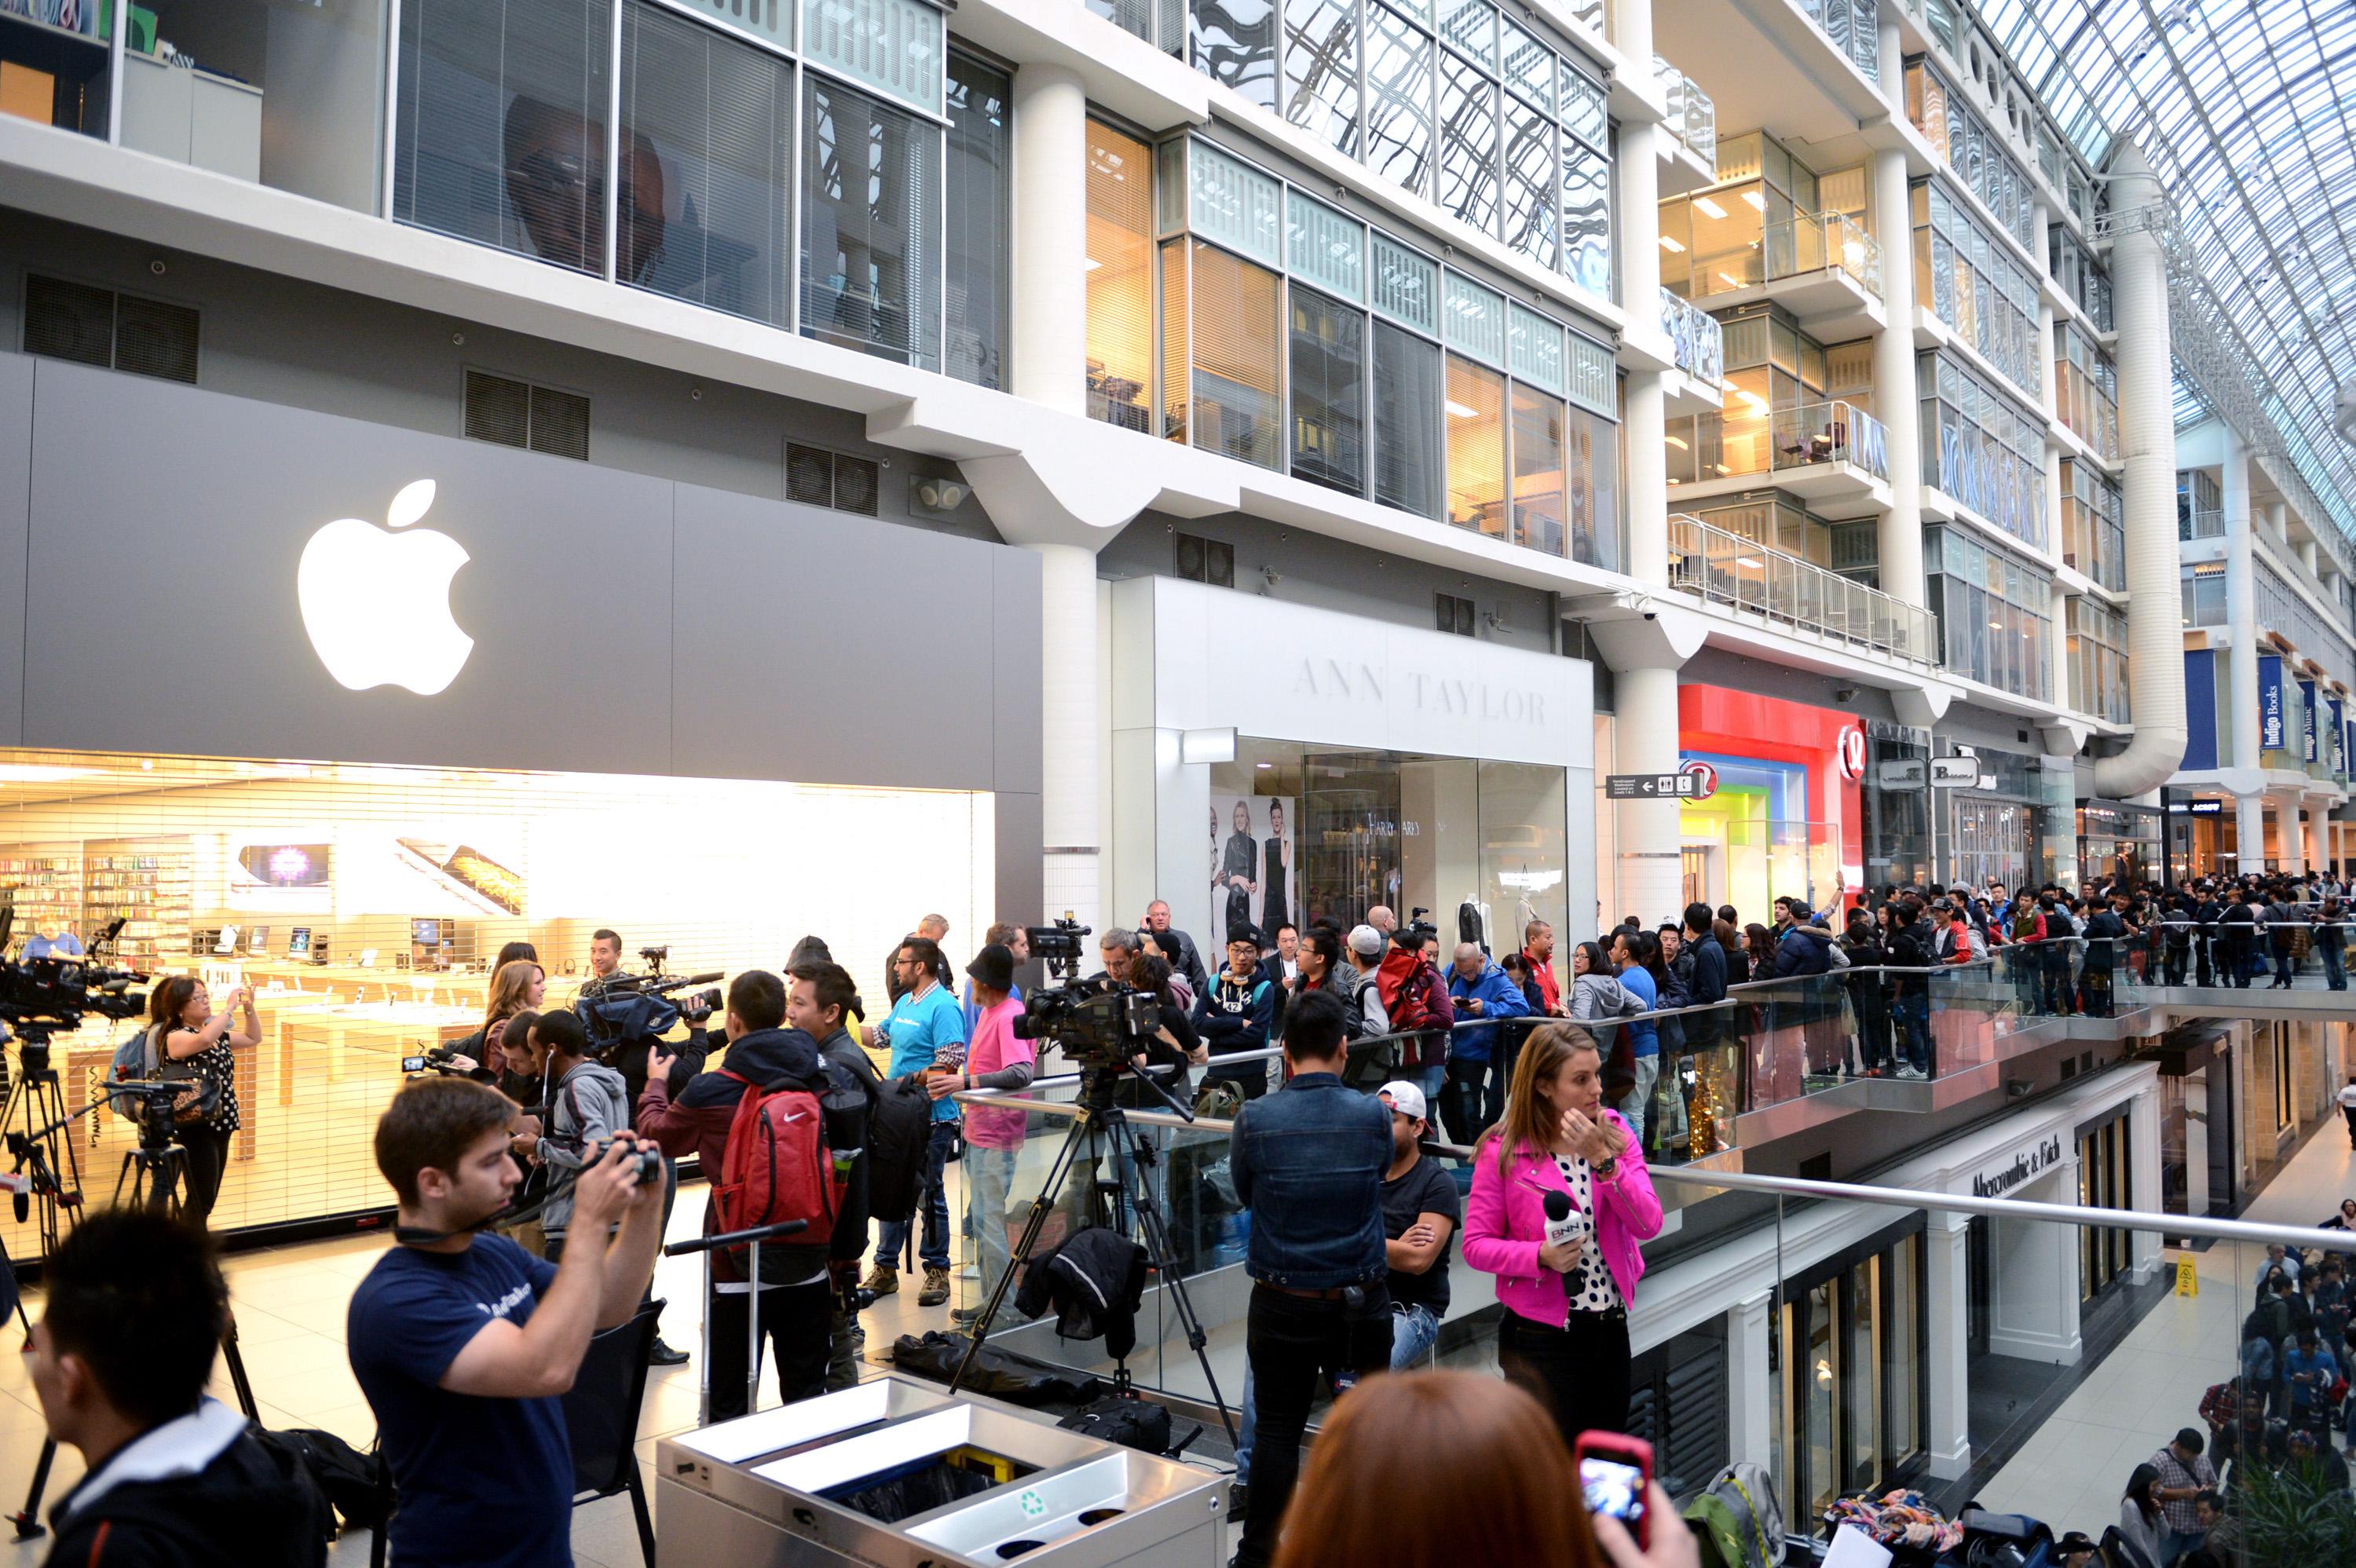 PHOTOS: Apple Store Lines for iPhone 6 and iPhone 6 Plus